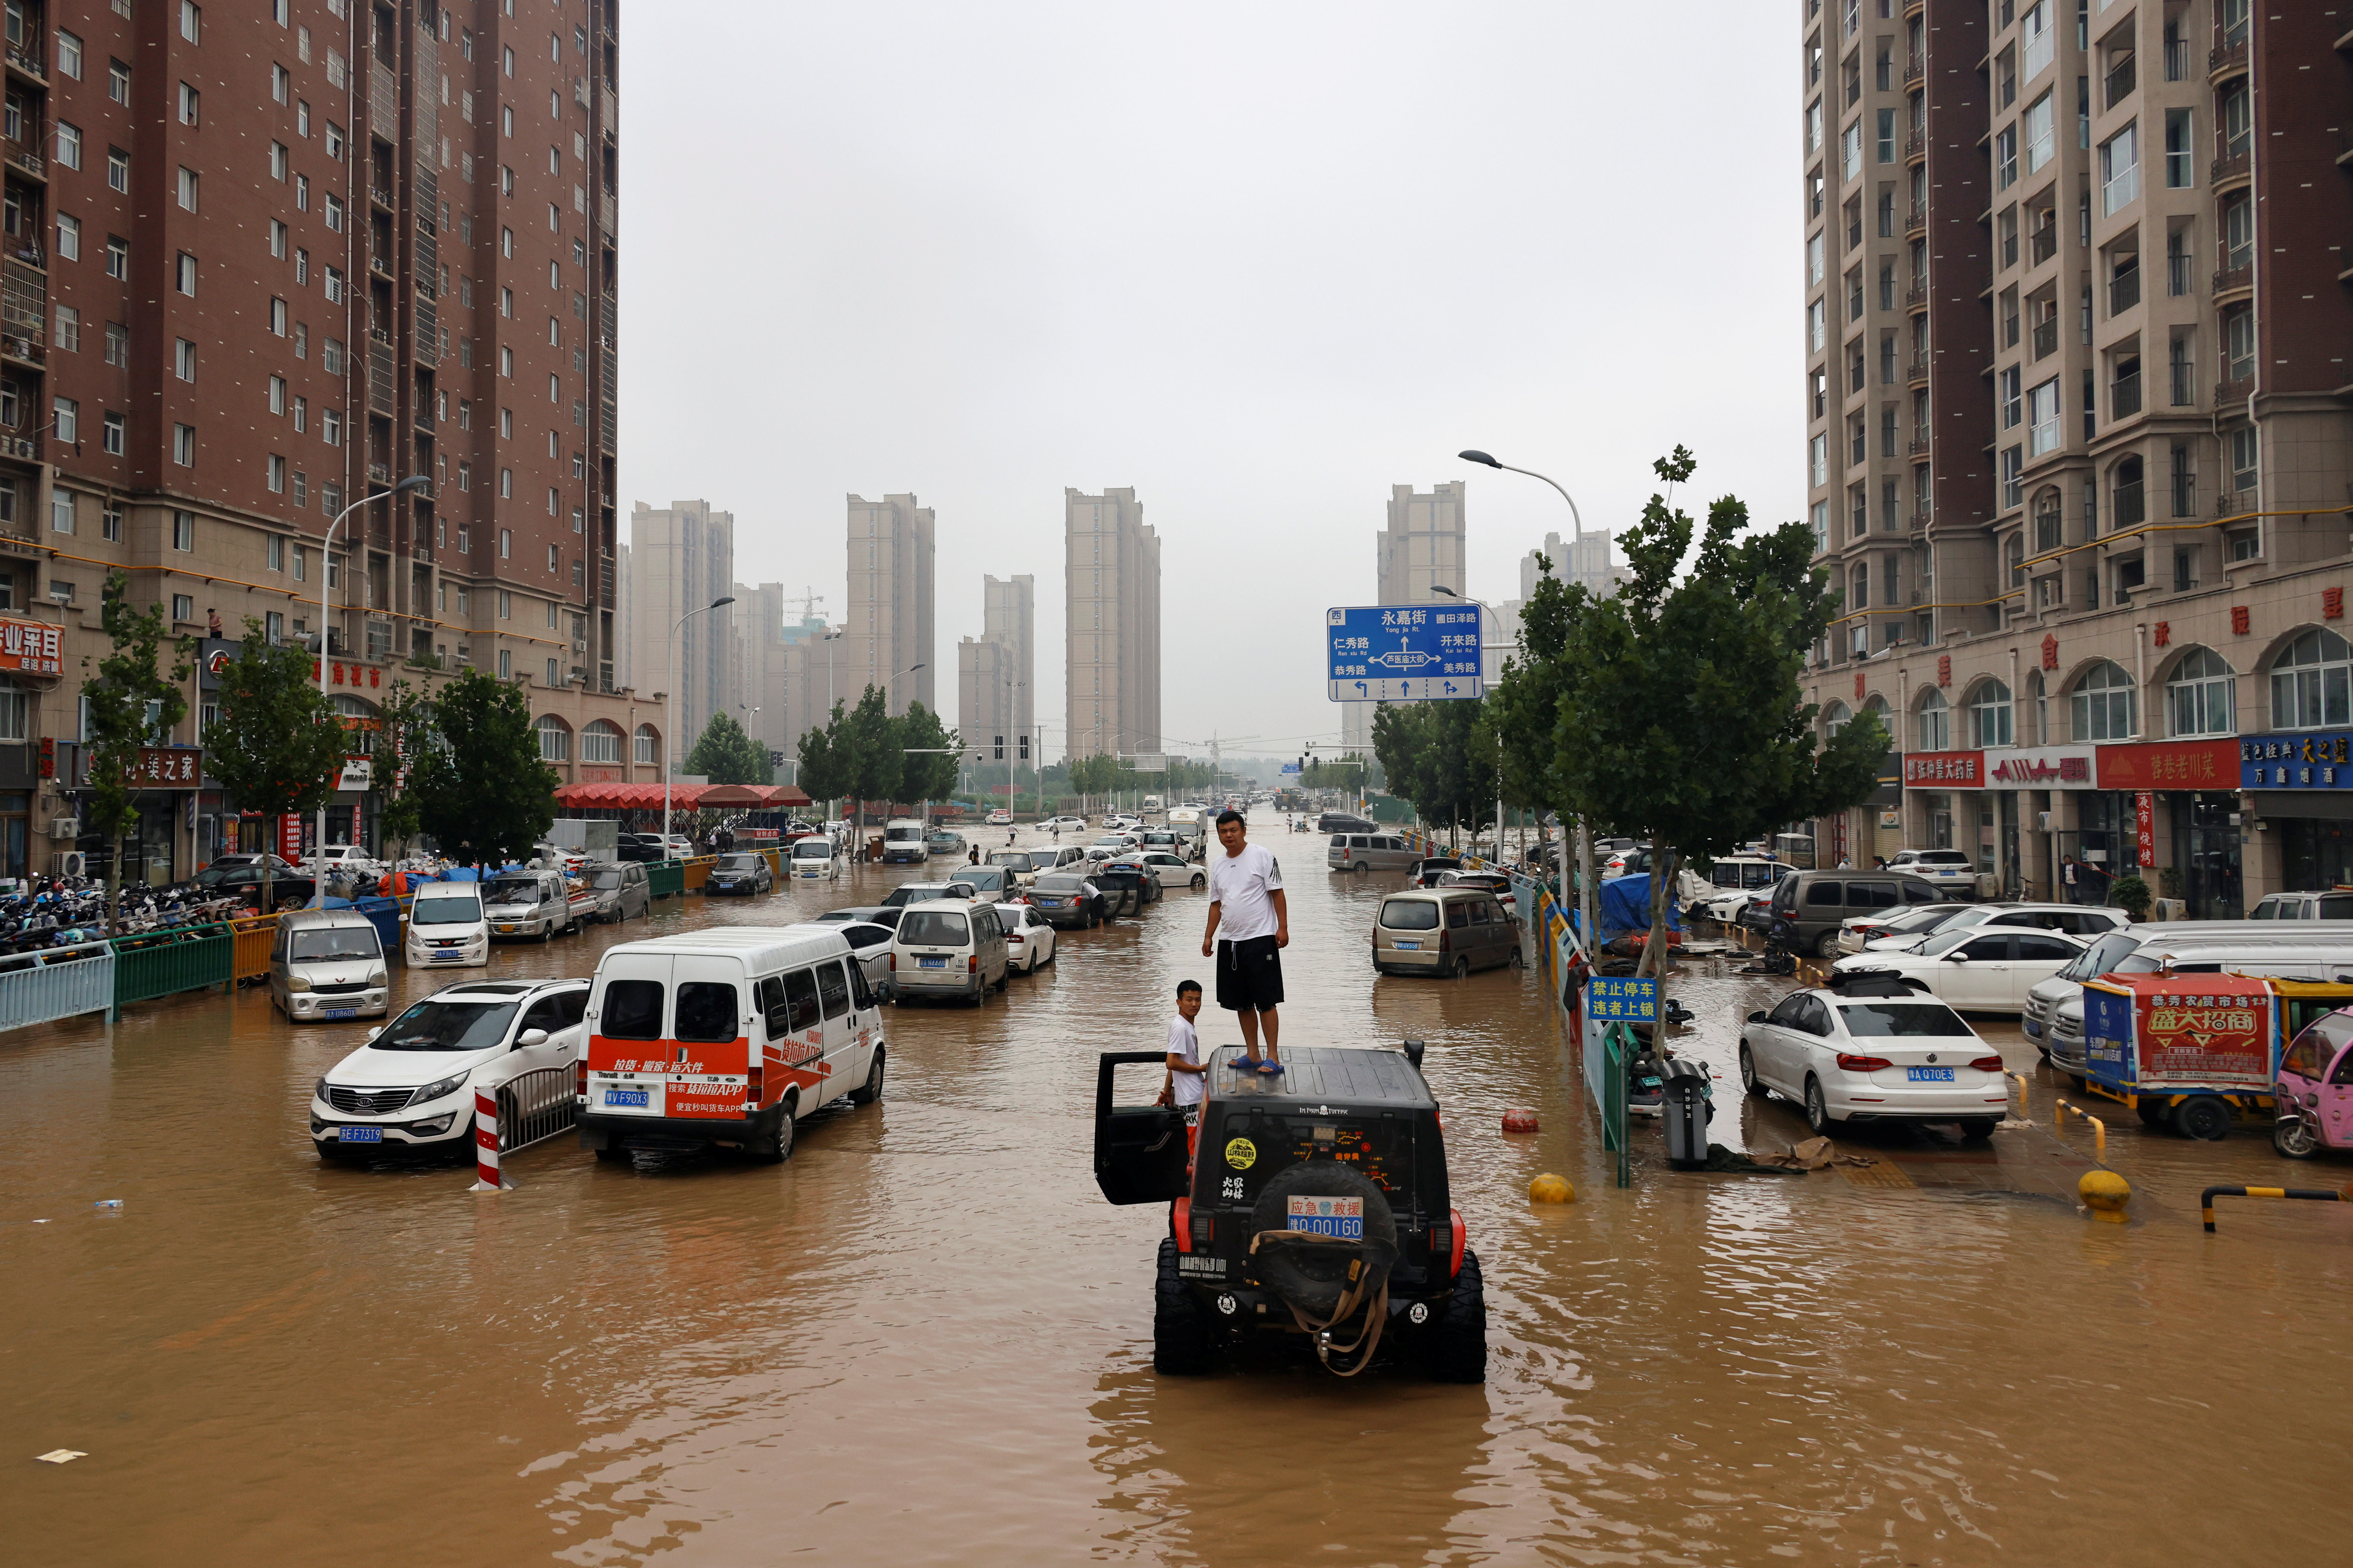 Men stand on a vehicle on a flooded road following heavy rainfall in Zhengzhou